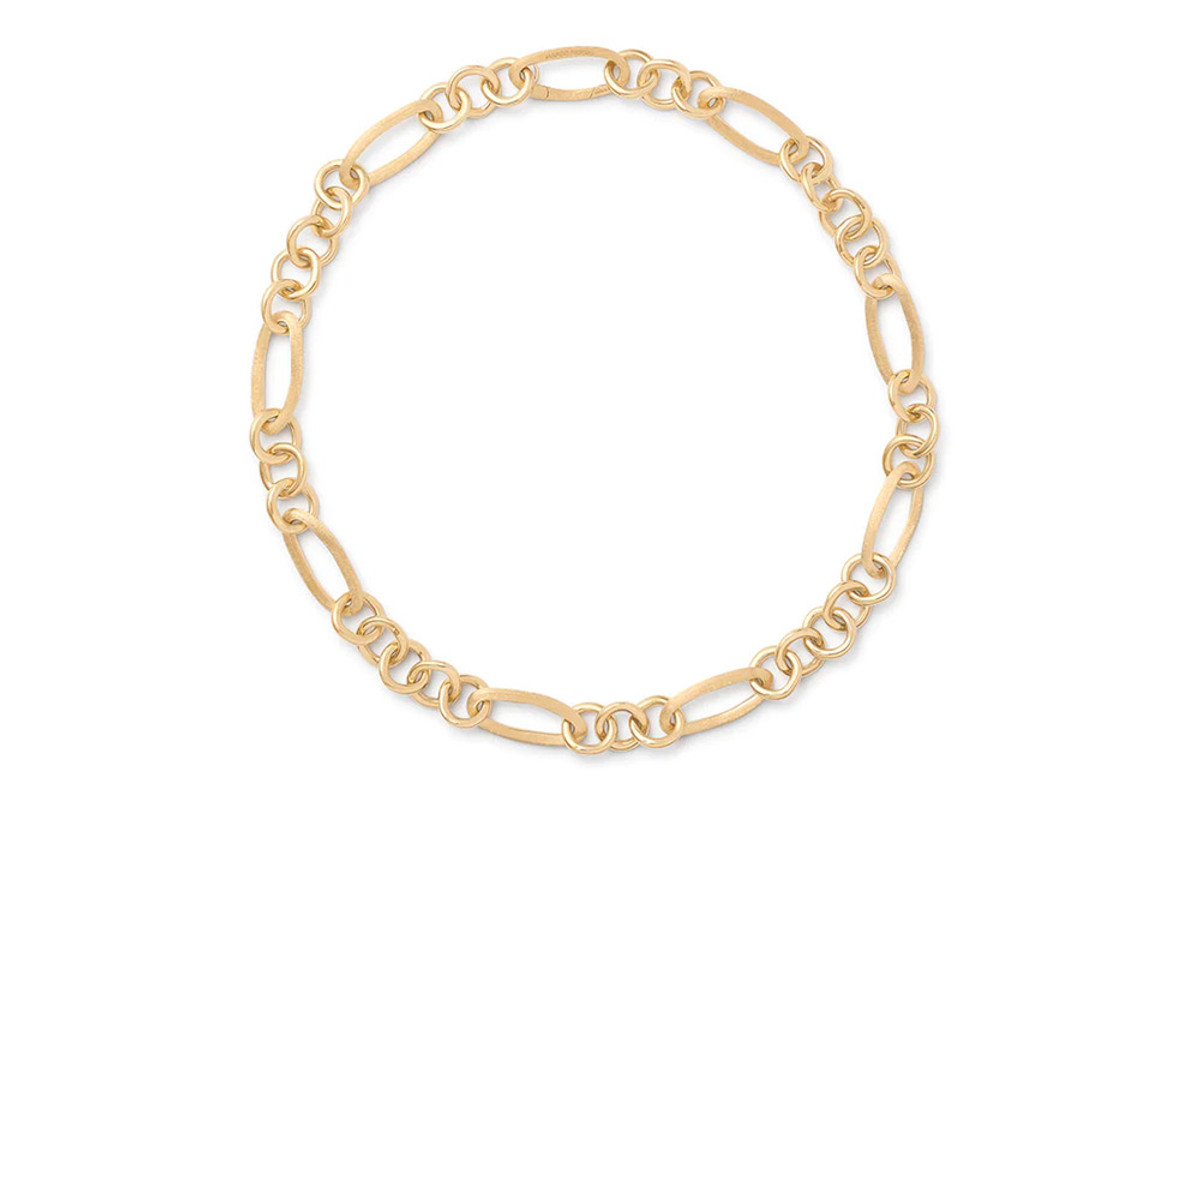 Marco Bicego Jaipur Link Collection 18K Yellow Gold Mixed Link Necklace-44441 Product Image